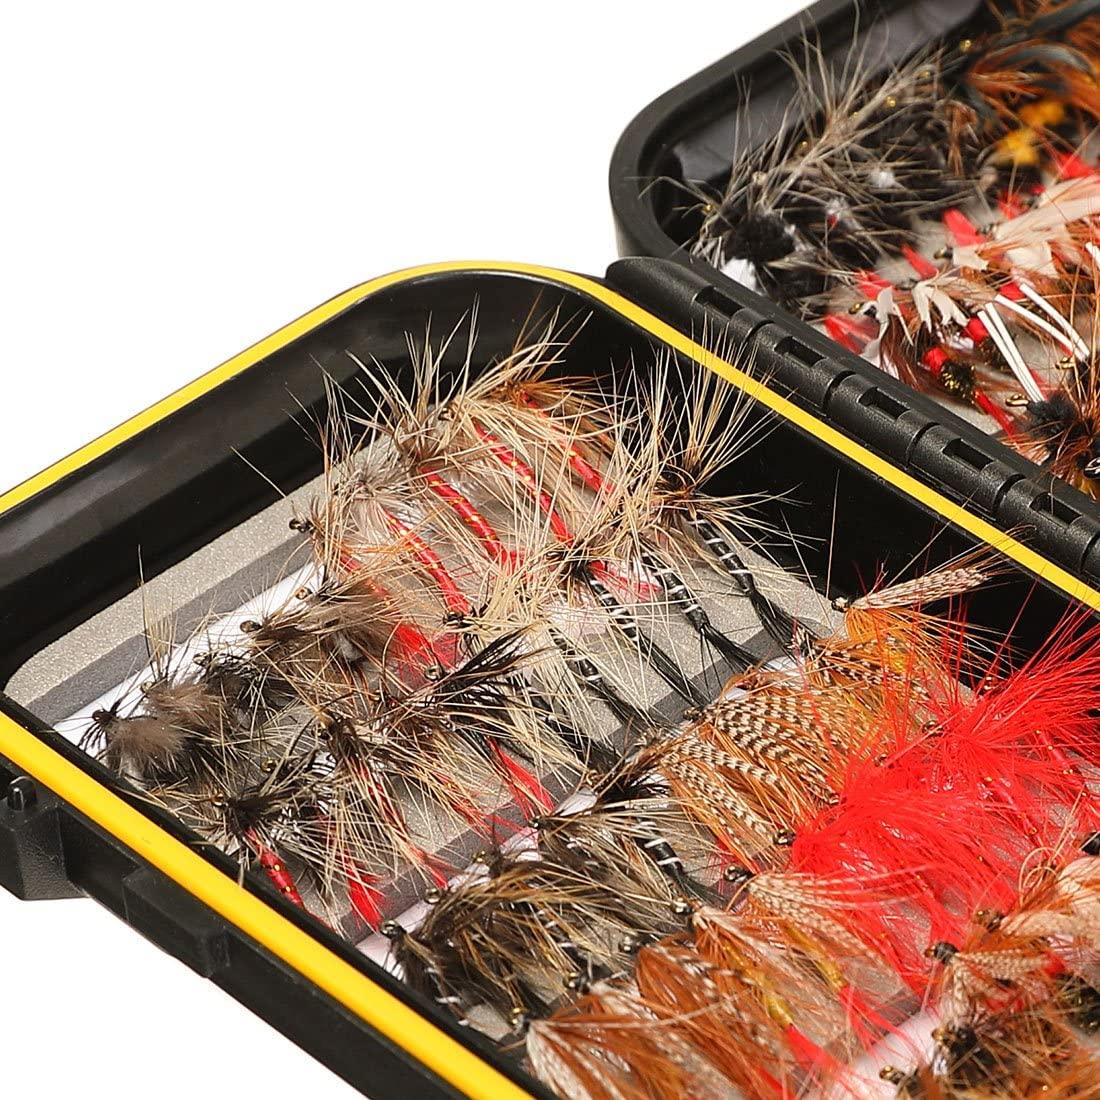 FISHINGSIR Fly Fishing Flies Kit - 64/100/110/120pcs Handmade Fly Fishing  Lures - Dry/Wet Flies,Streamer, Nymph, Emerger with Waterproof Fly Box  MUST-HAVE SERIES - 120PCS Flies Kit + Fly Box